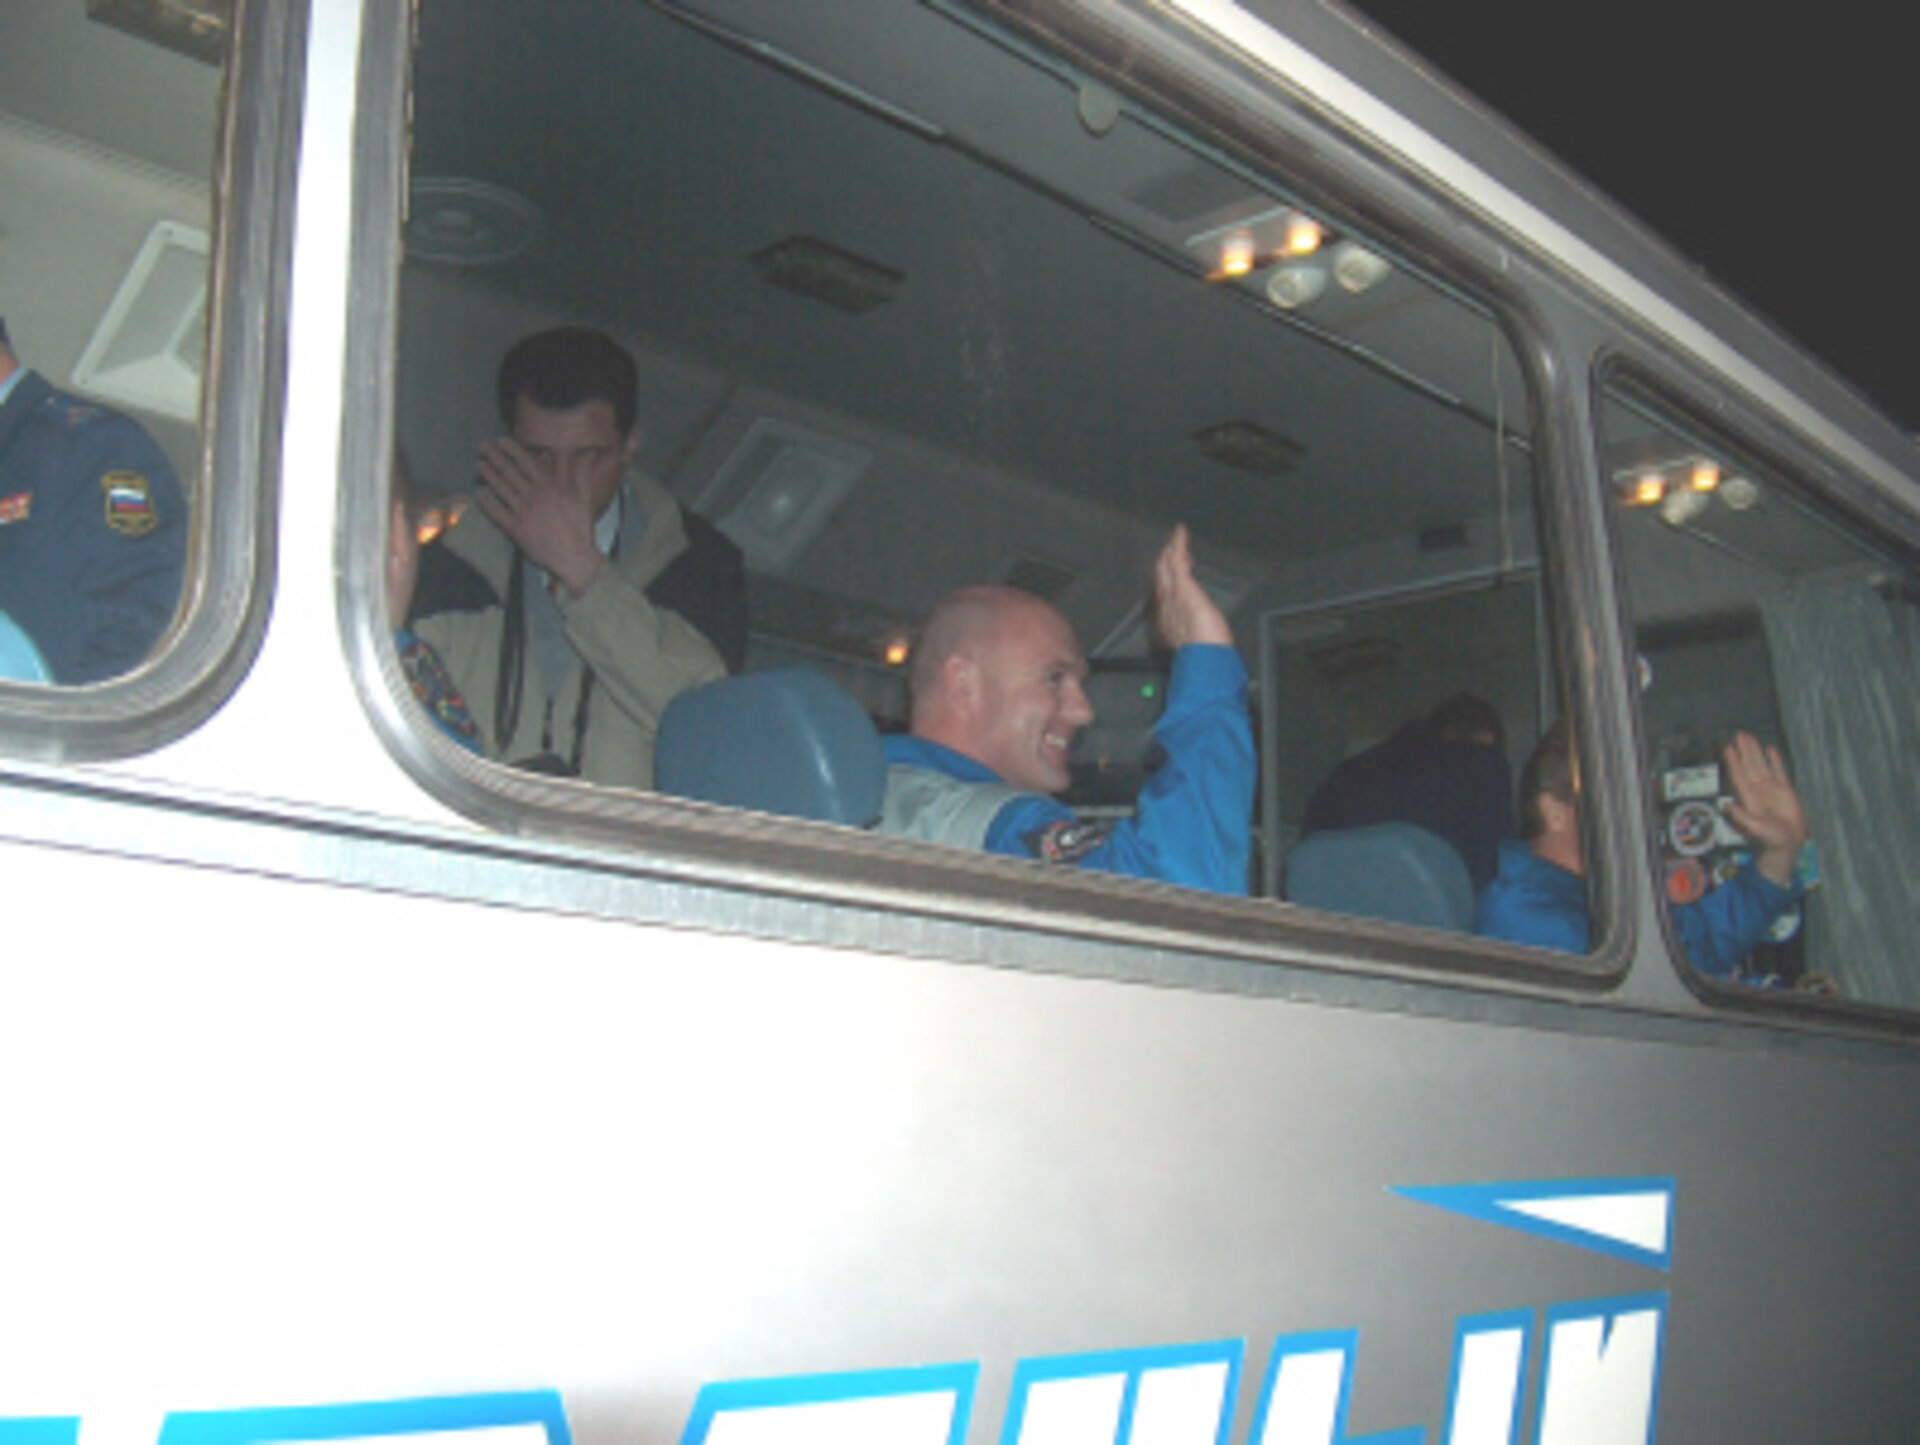 A smiling André Kuipers on the bus after leaving the Kosmonavt Hotel in Baikonour